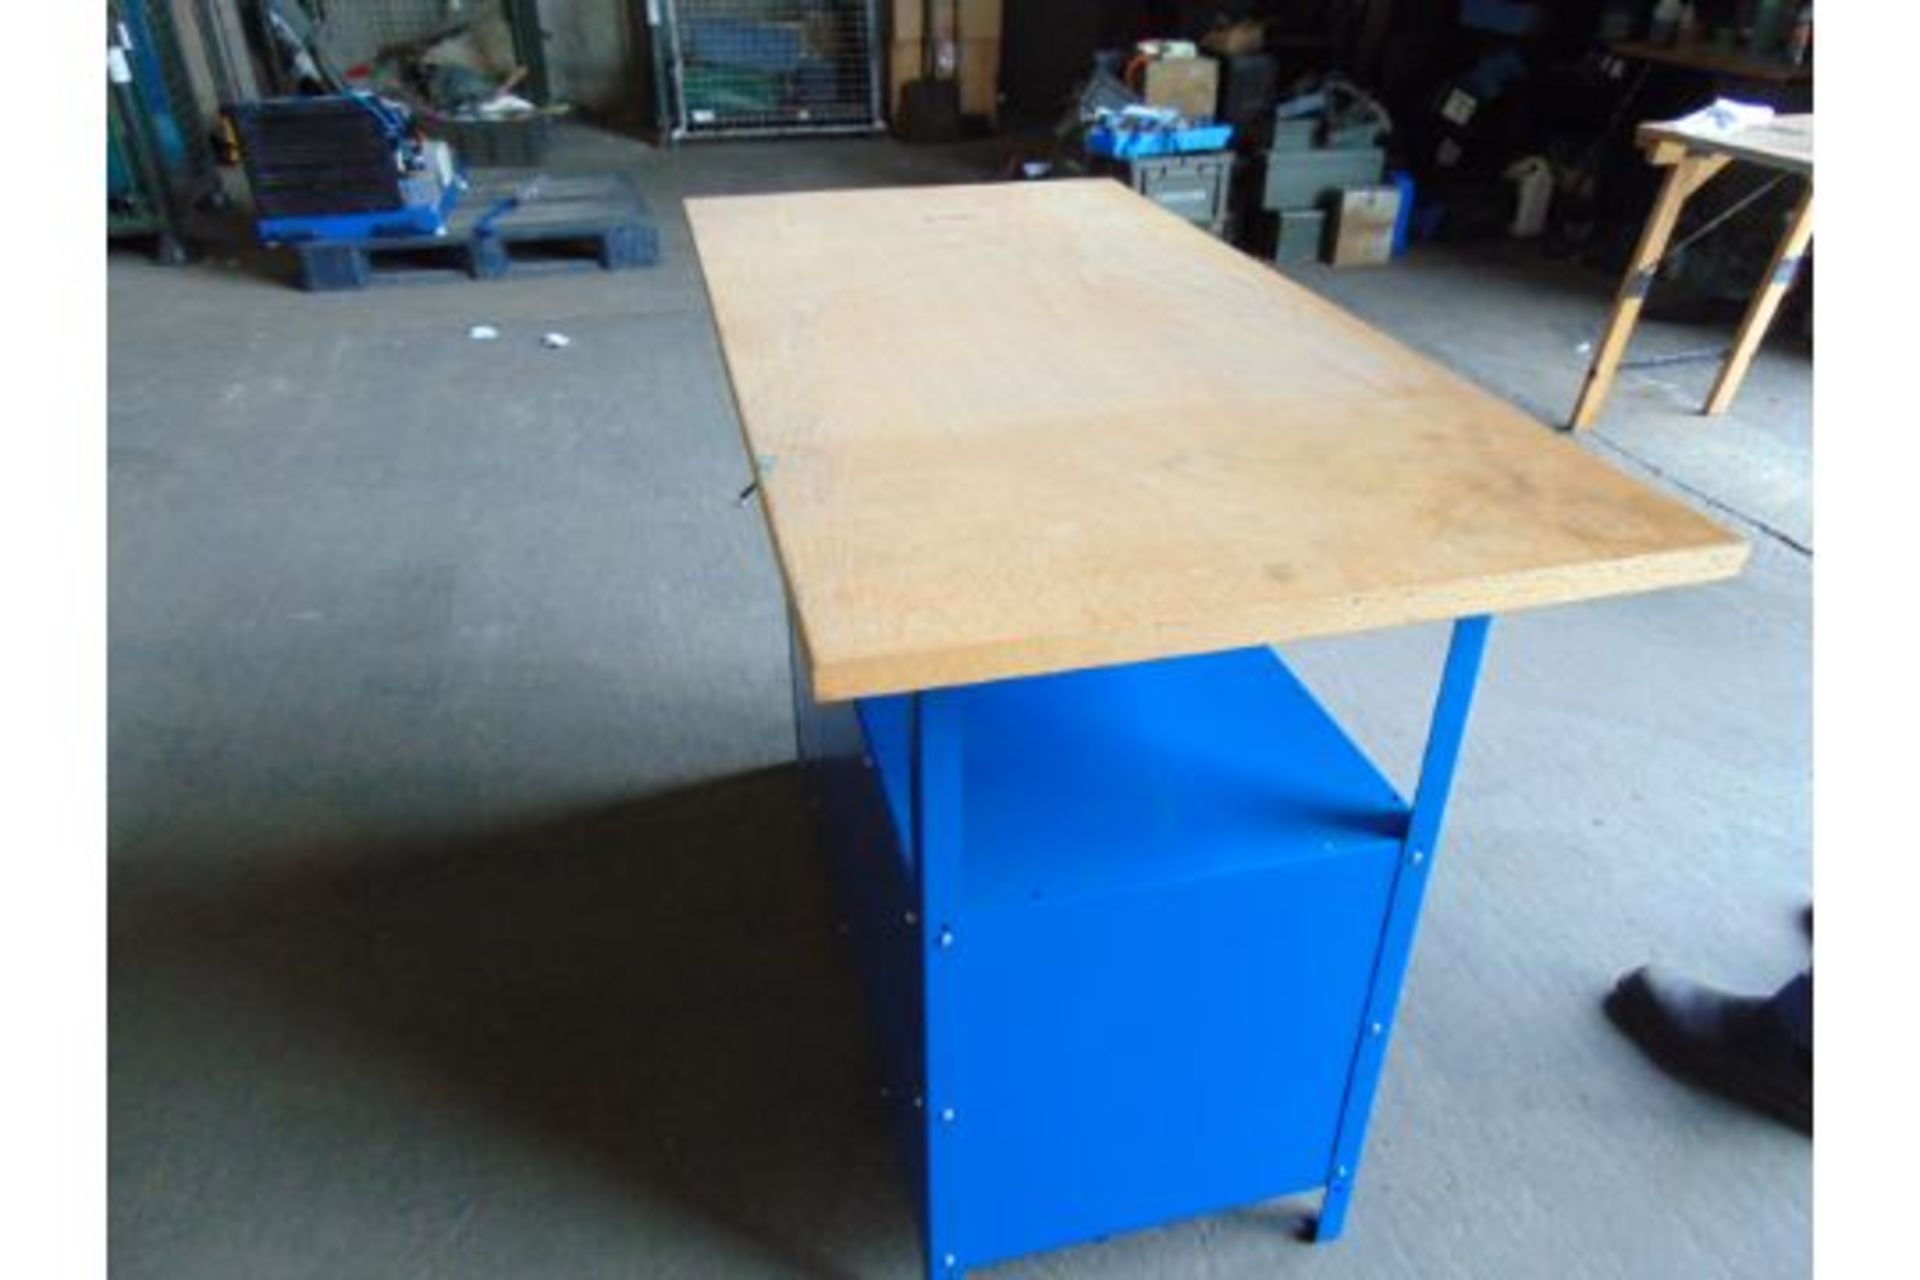 Clarke Workshop Bench c/w Cupboard ad Draws Wooden Top as new from MoD - Image 4 of 4